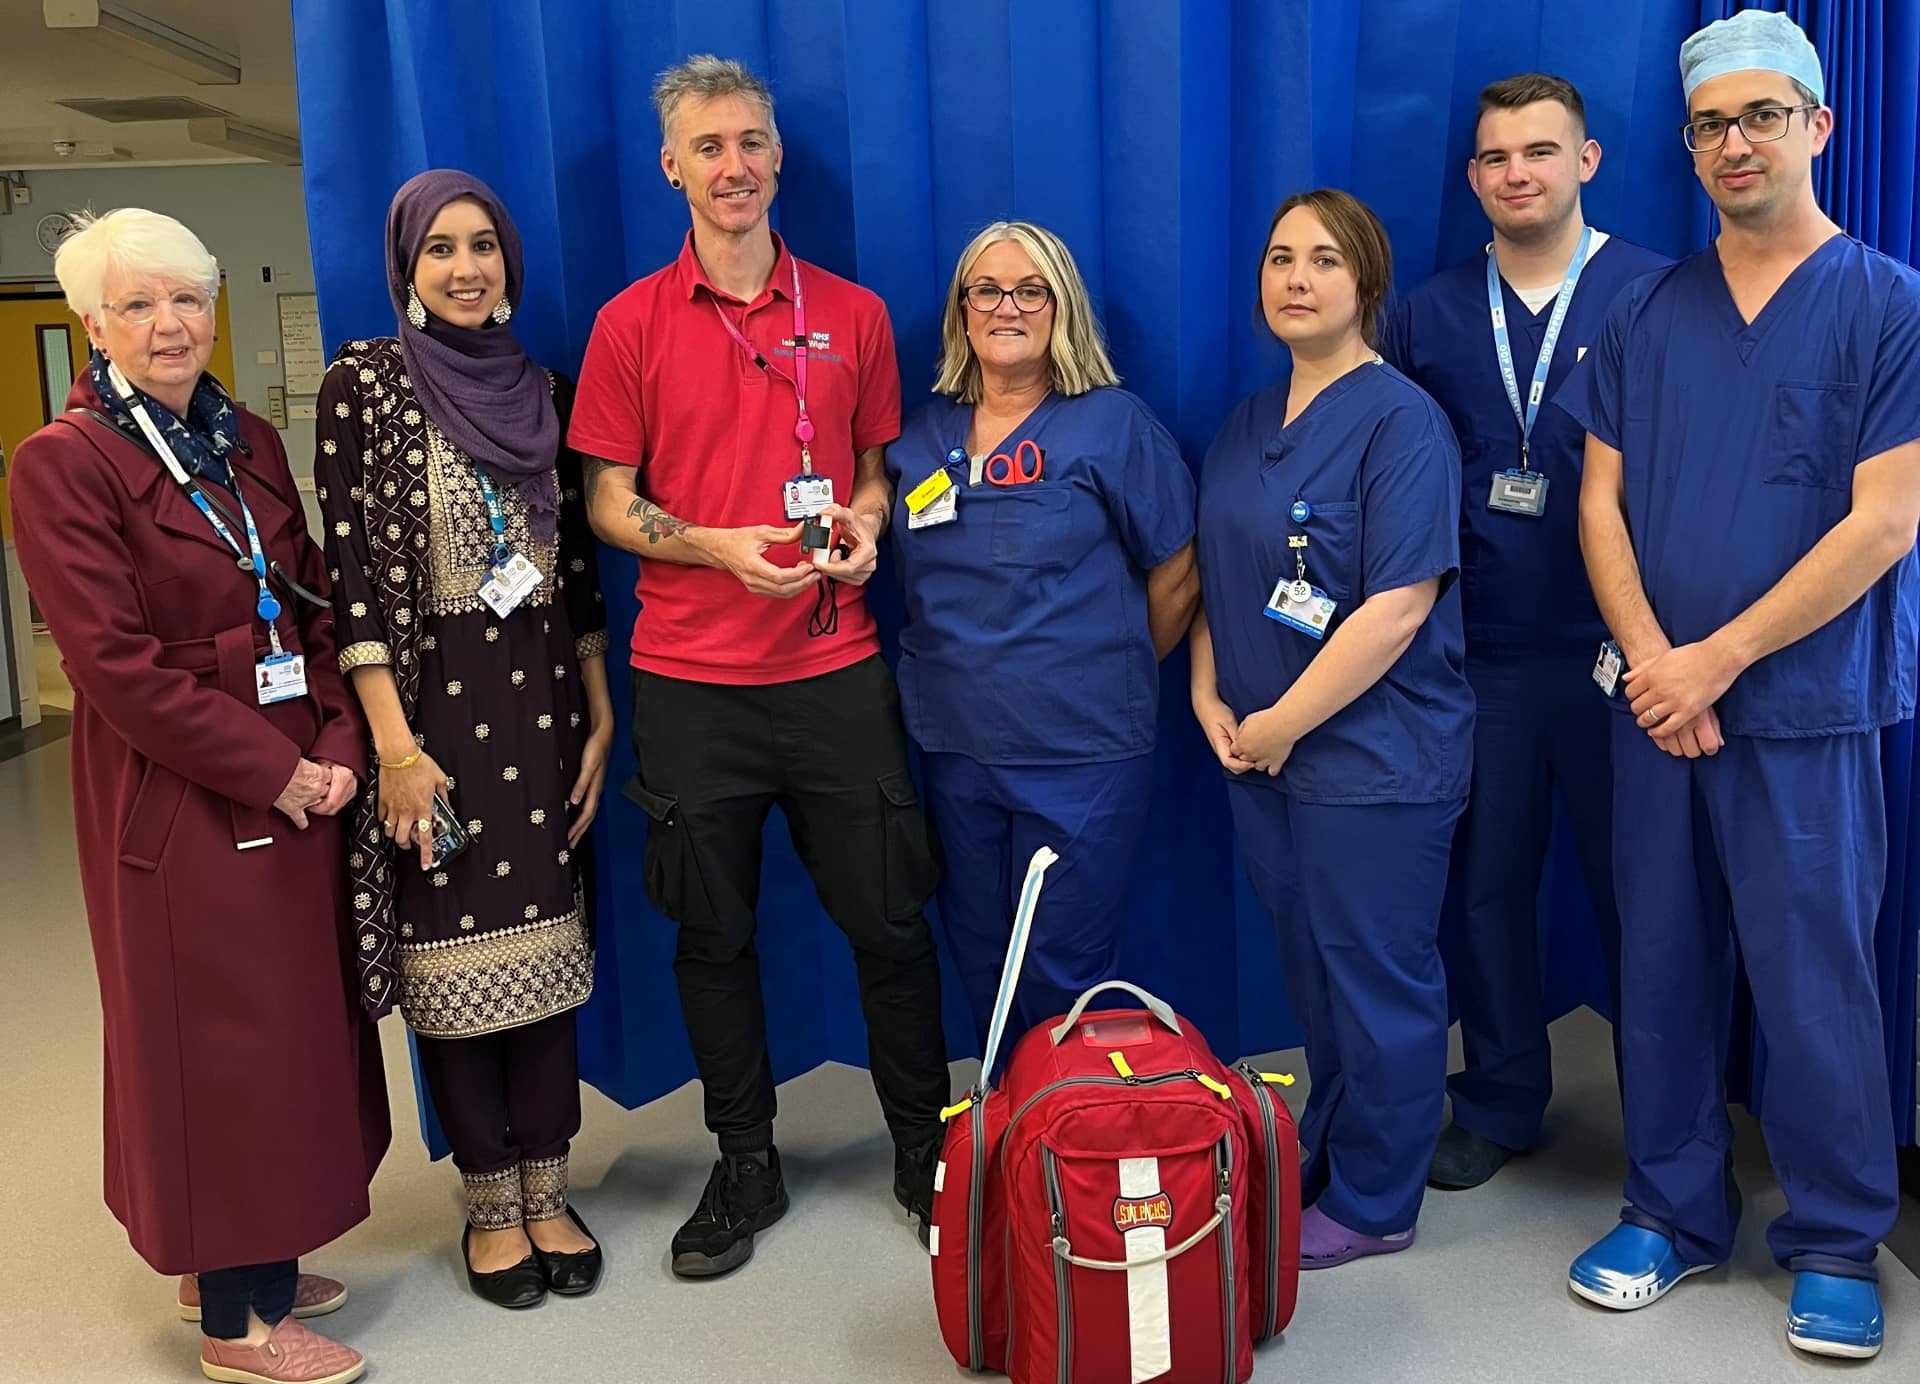 Lesley Myland - Chair of Trustees, Friends of St Mary’s Hospital, Jussna Mateen - Trainee Biomedical Scientist, Alex Paul - Snr Resuscitation Officer, Dawn Hall – ODP, Beth William-ODP, Dan Woodford Apprentice ODP & John Dunkinson – ODP